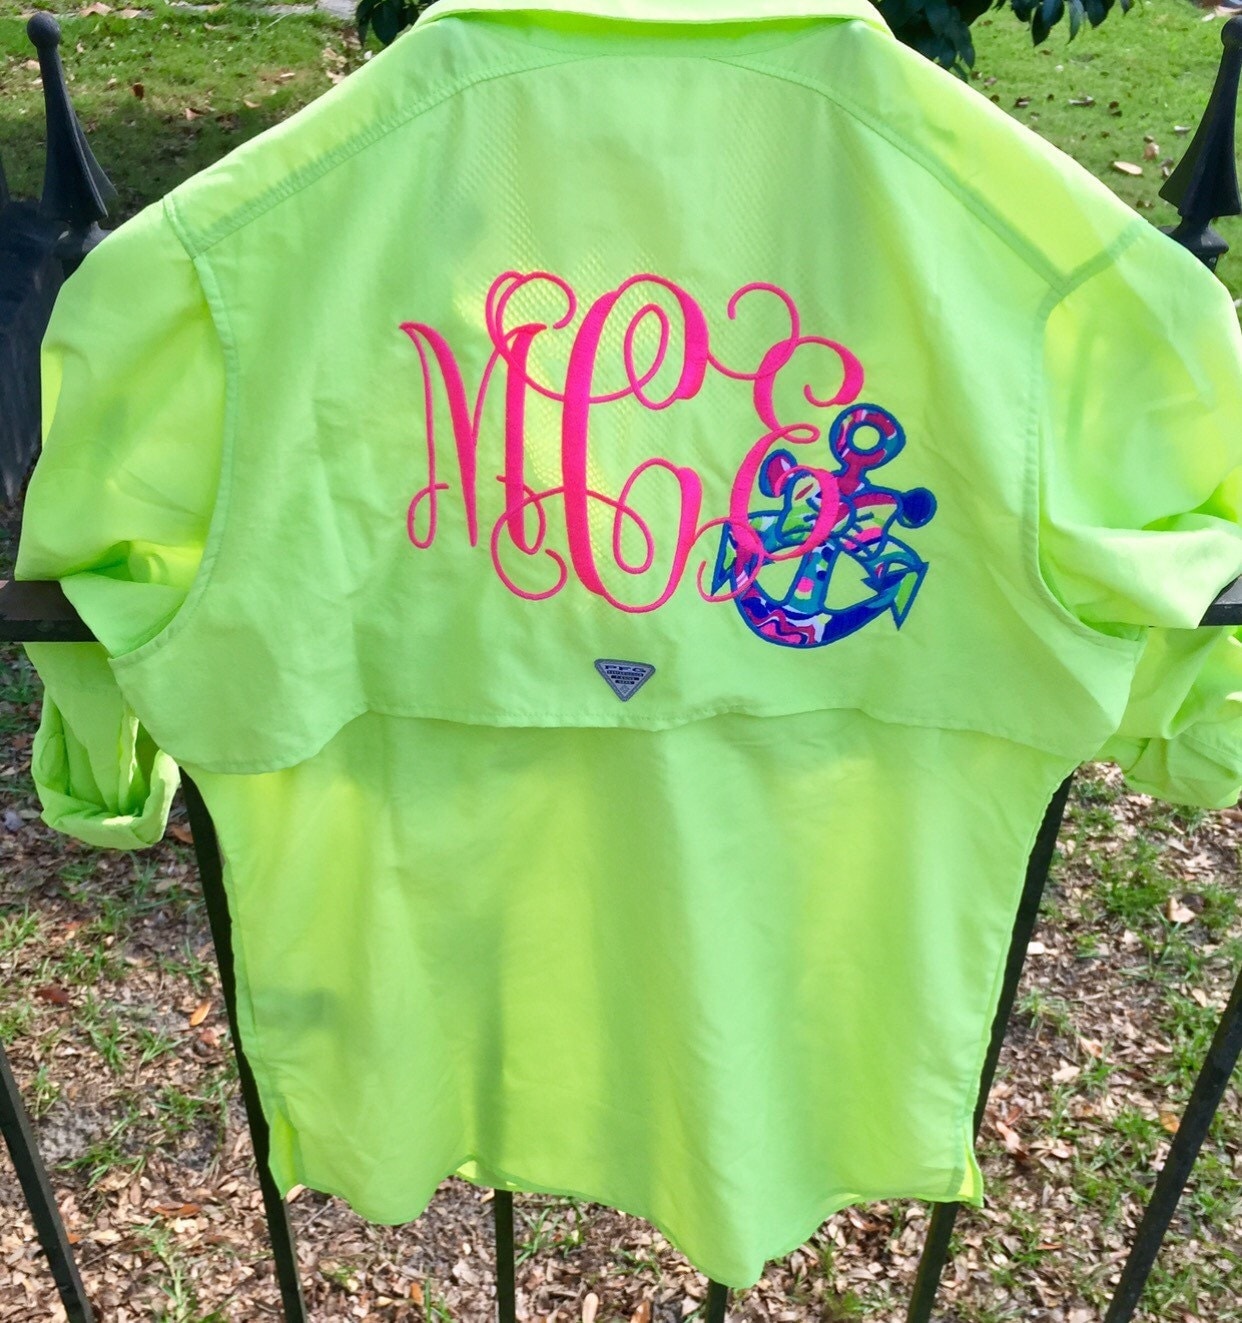 Preppy Monogrammed Columbia PFG Fishing Shirt with Lilly